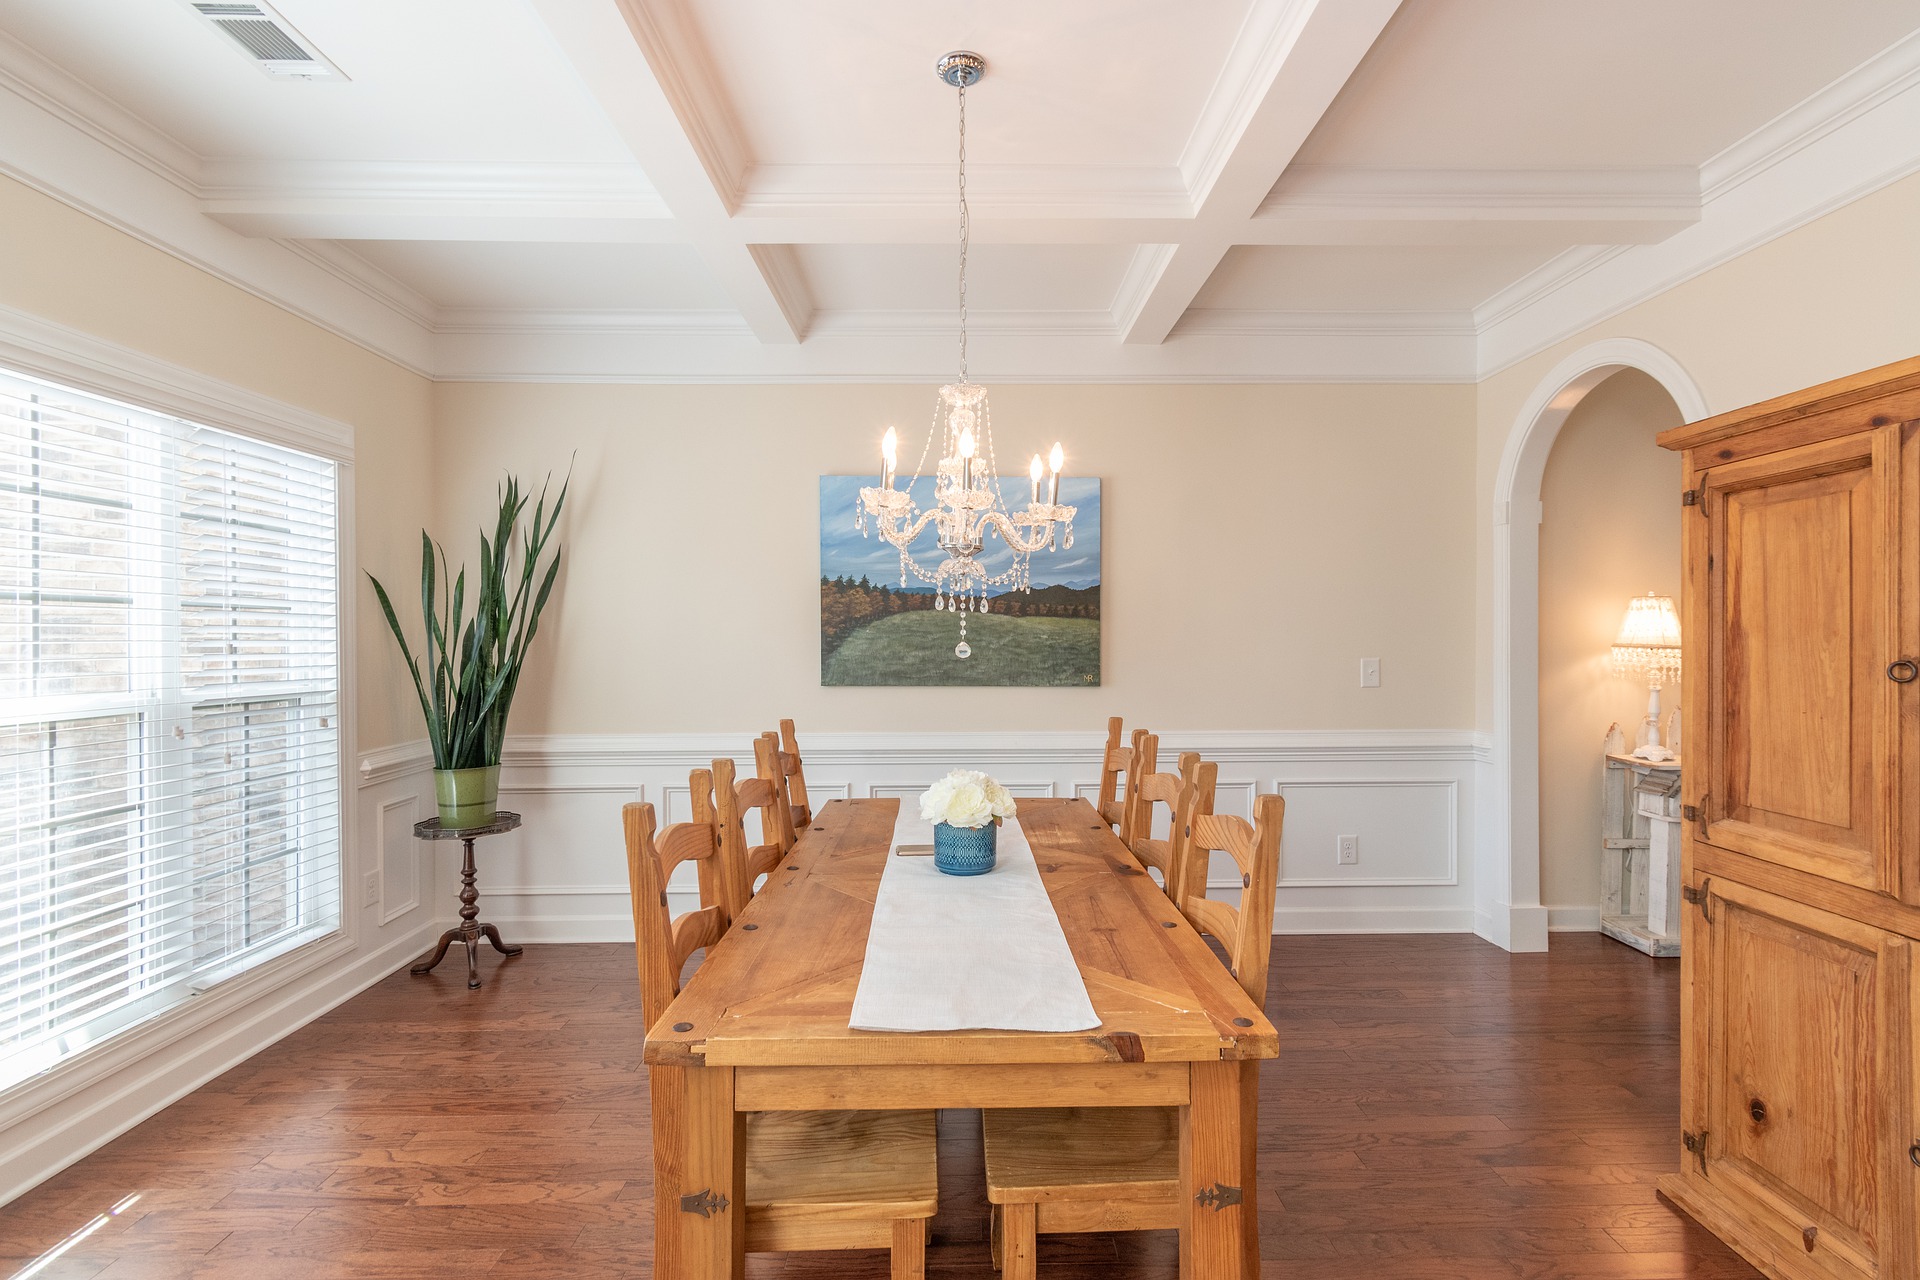 A cozy home is equipped with ASI Architectural Wood Coffered Ceiling to improve the acoustics of the dining room.